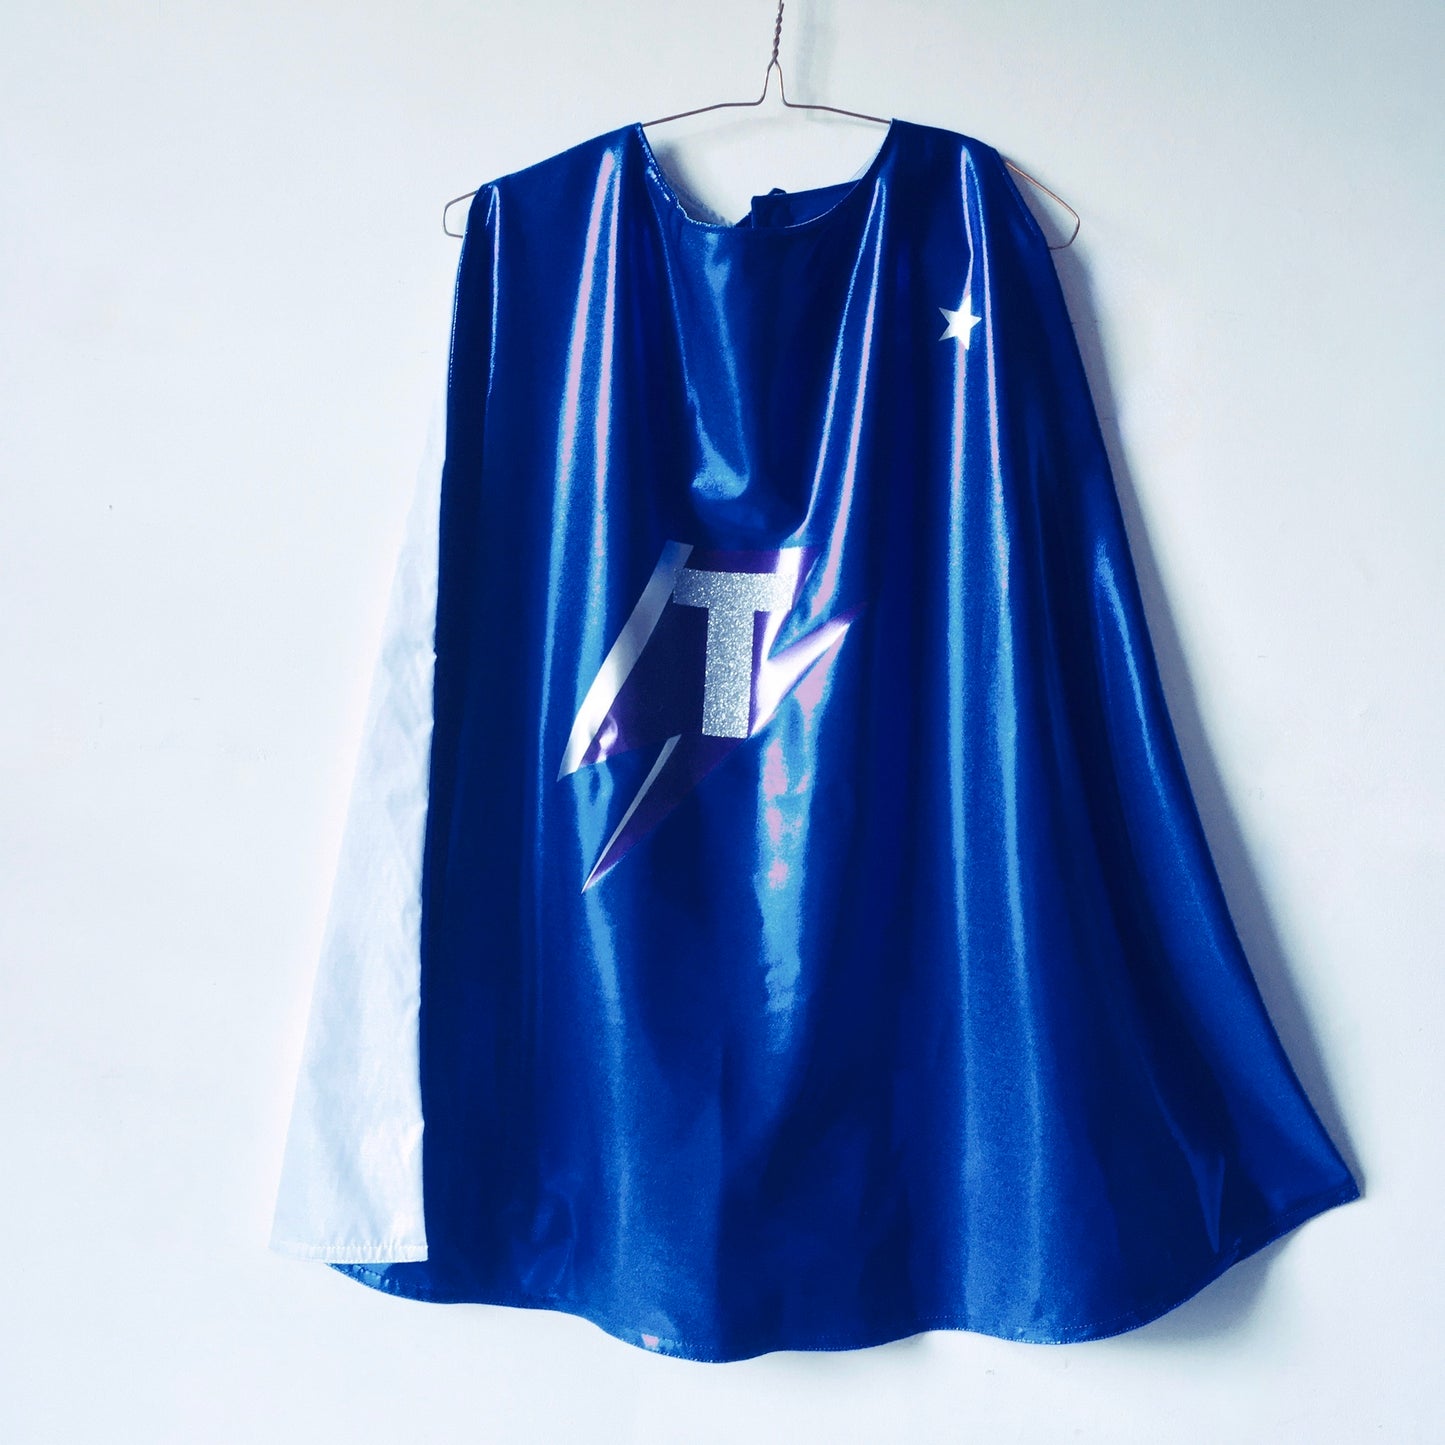 Blue personalised superhero cape with grey lining by For Just ONE Day